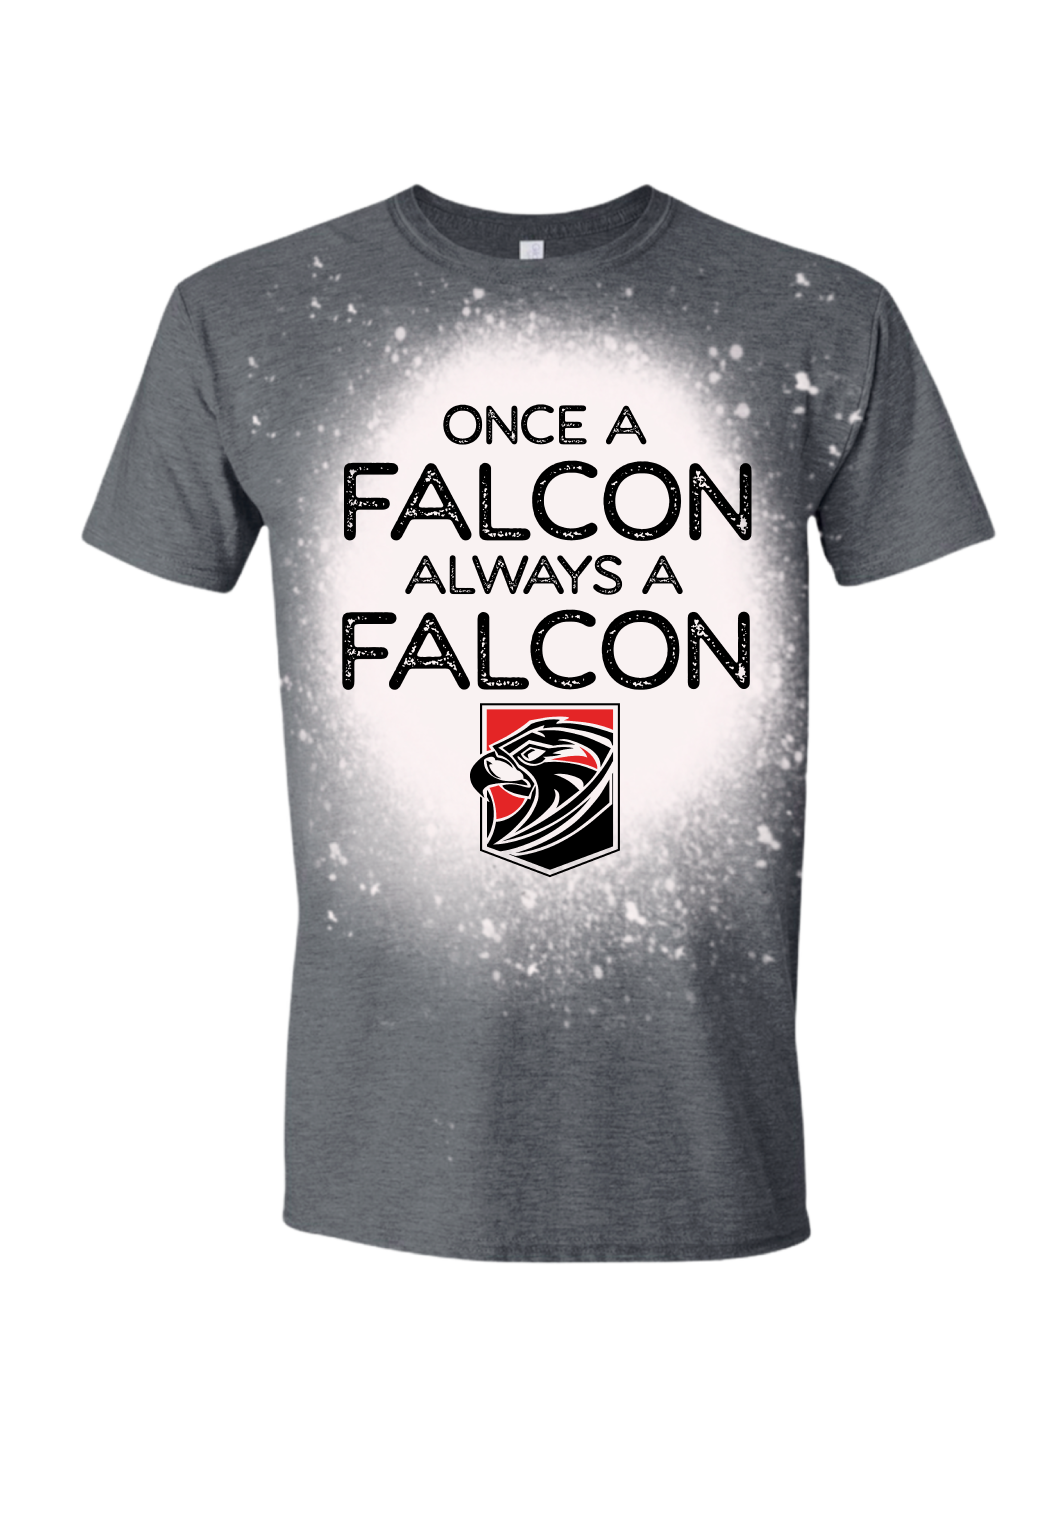 Once A Falcon Always A Falcon Bleached Tee